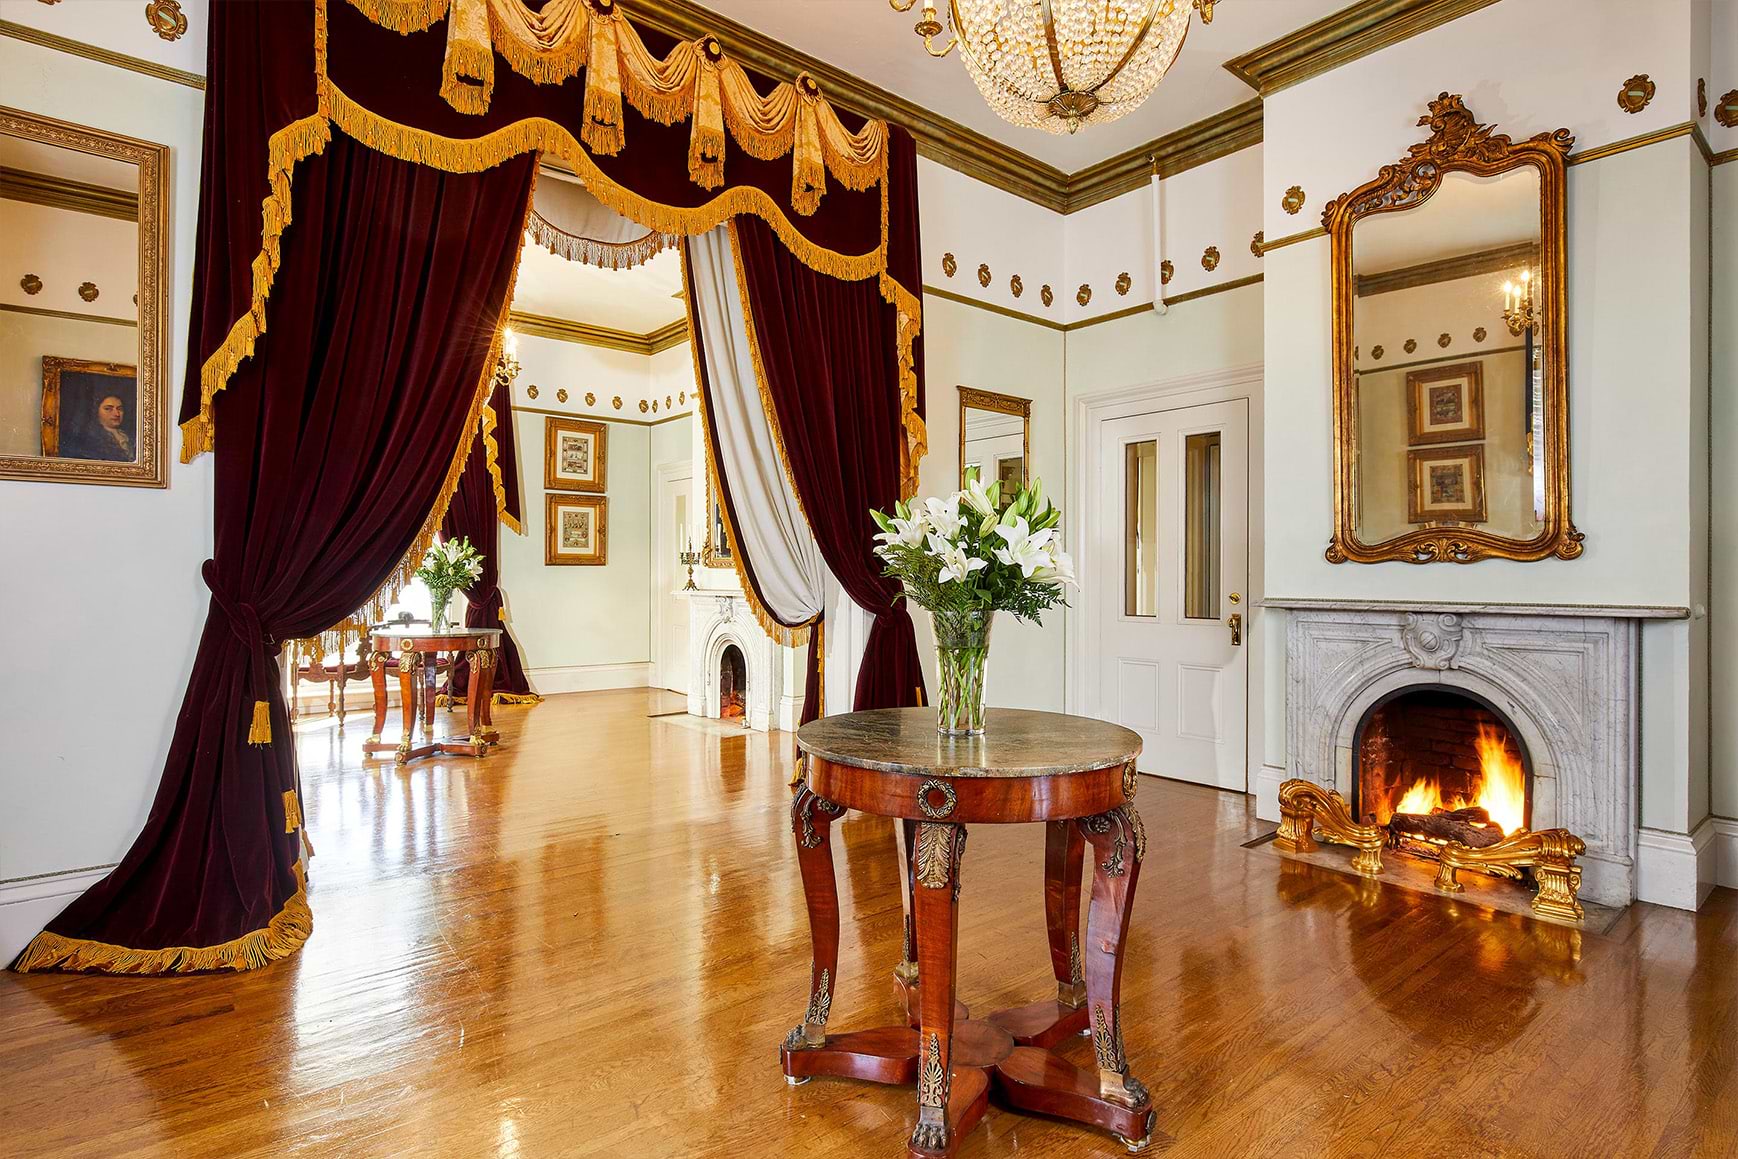 Colonial Fixtures at This Extravagant Historic Manor With Bay Views and Superb Gardens